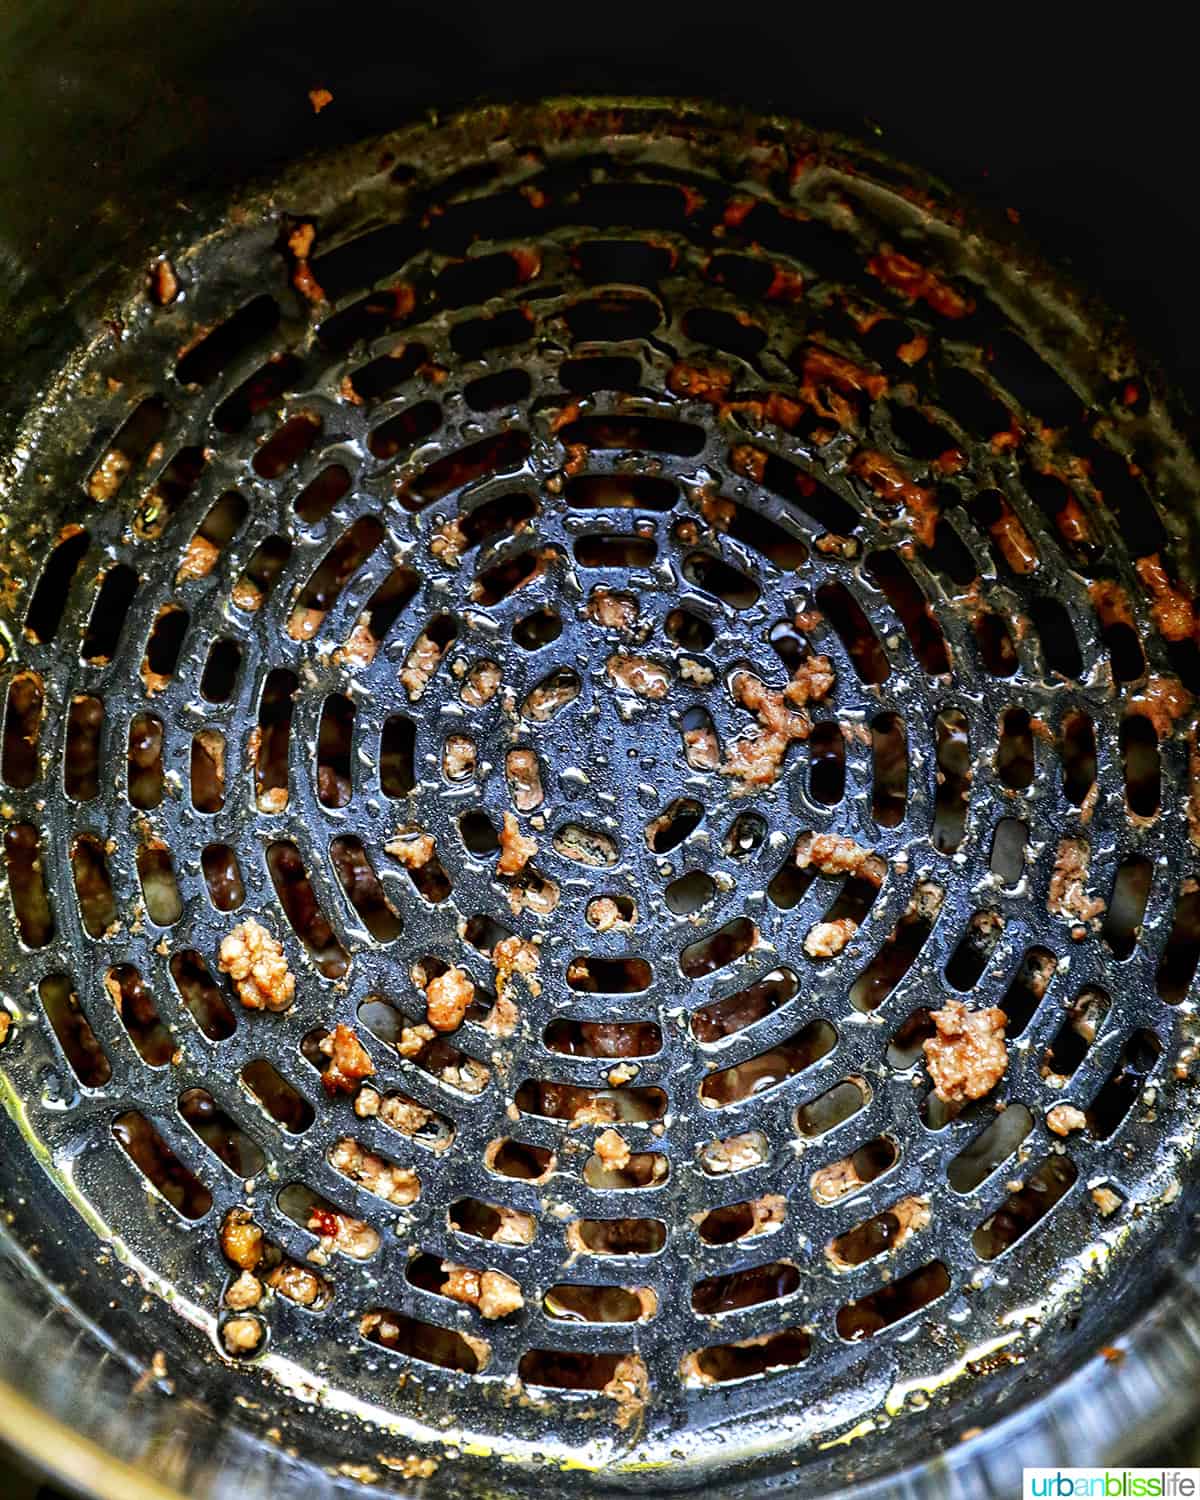 ground beef drained at the bottom of an air fryer.